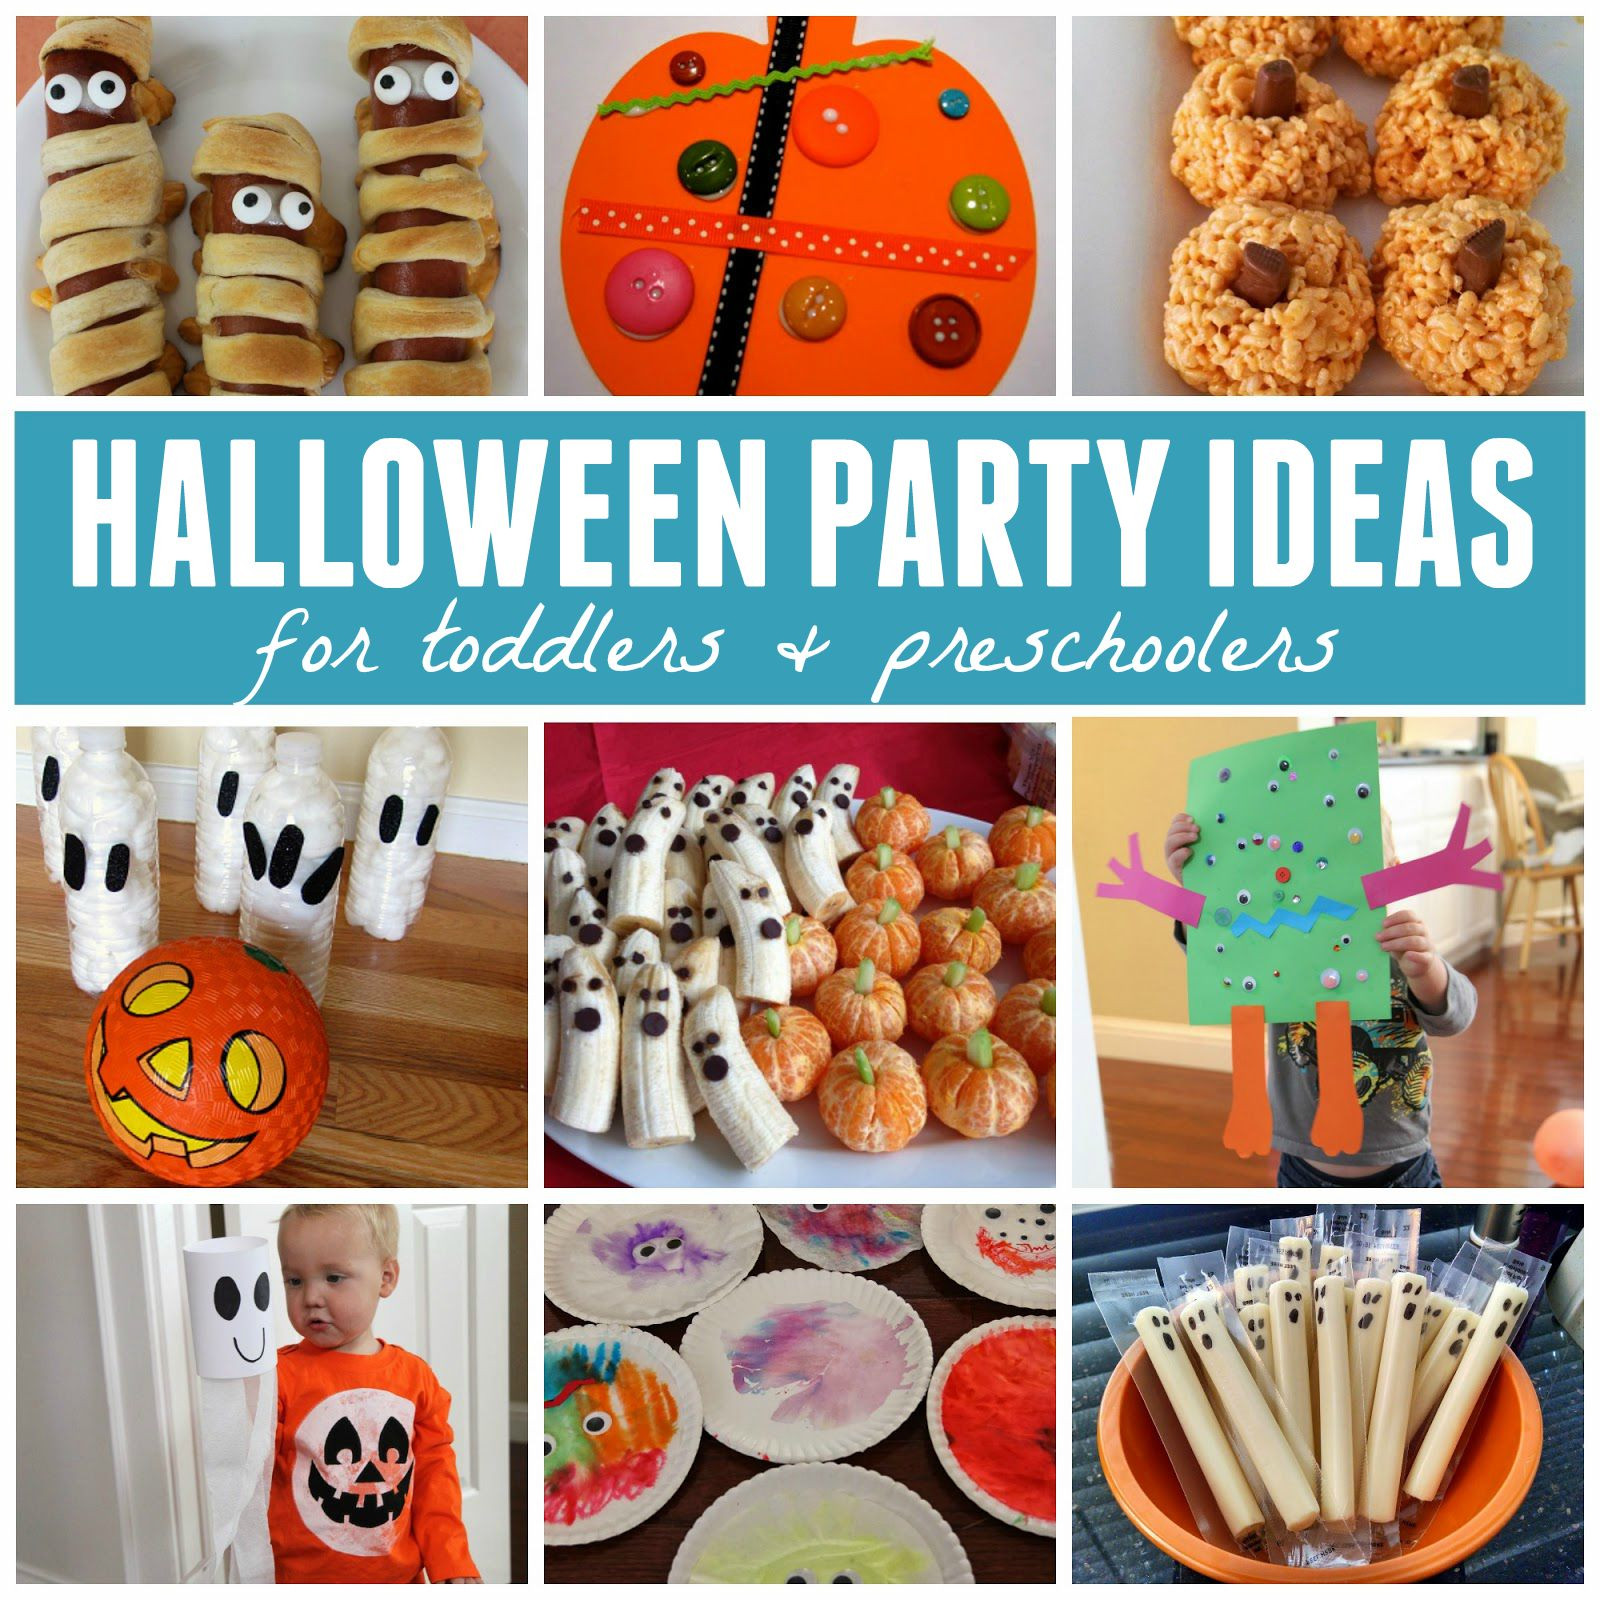 Fun Ideas For Children'S Halloween Party
 Toddler Approved Last Minute Halloween Party Ideas